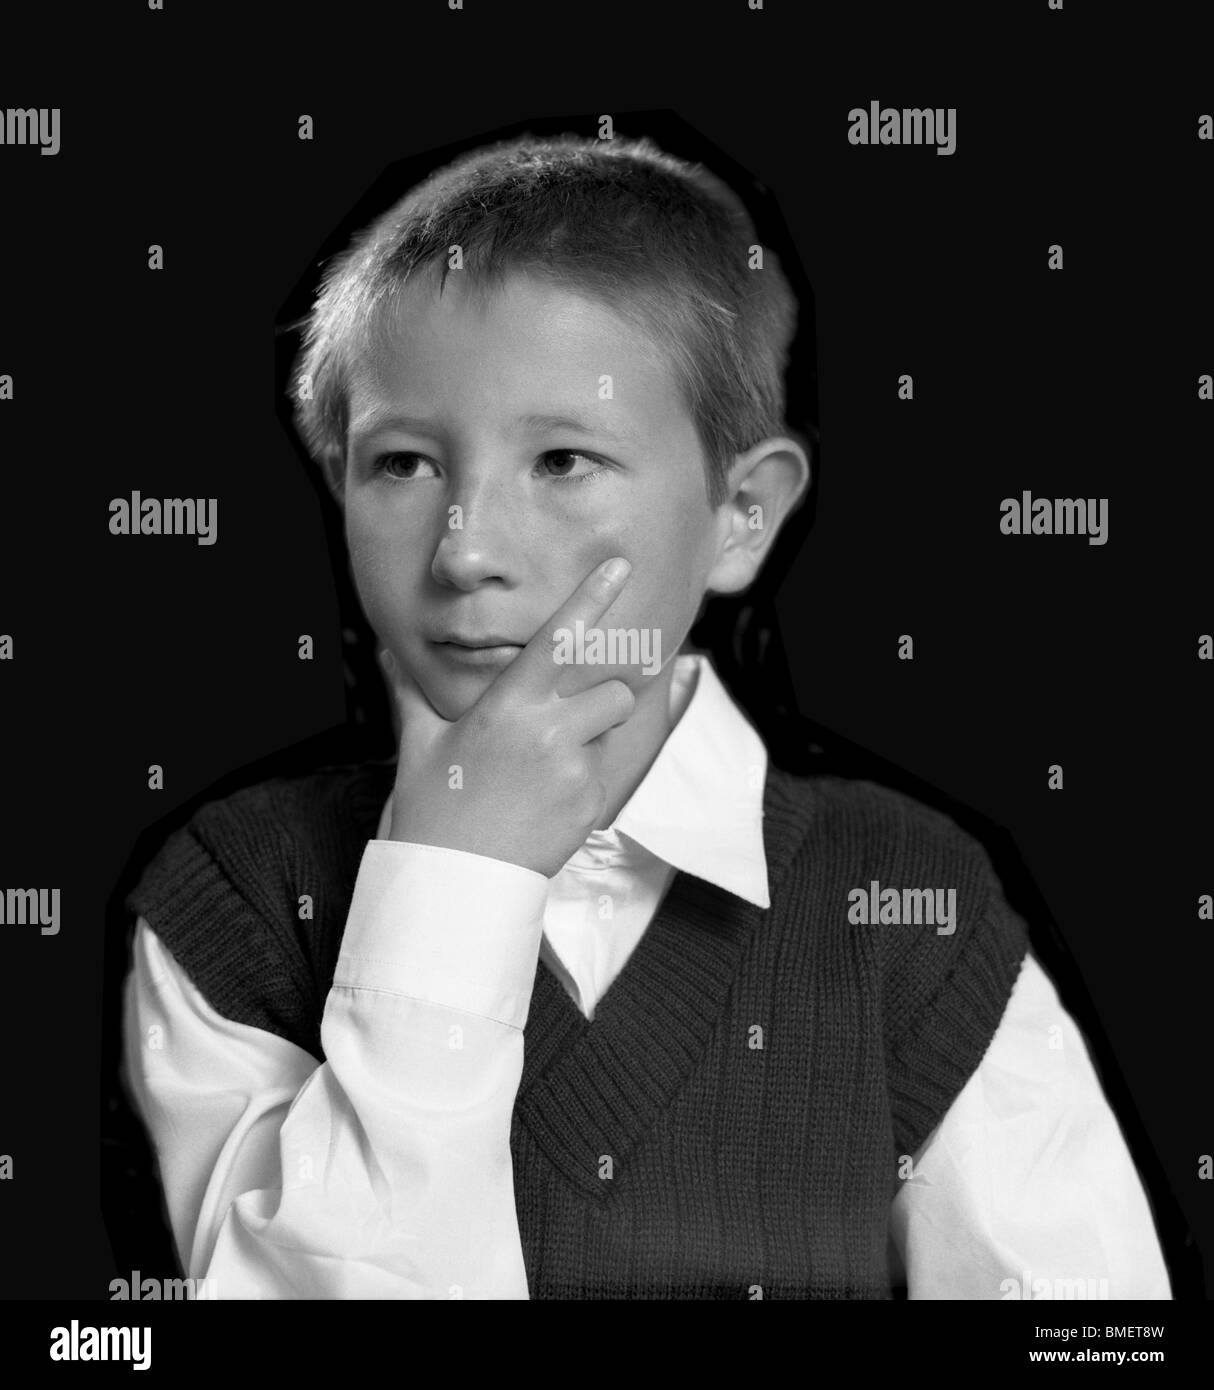 Classic monochrome portrait of a young boy on film Stock Photo